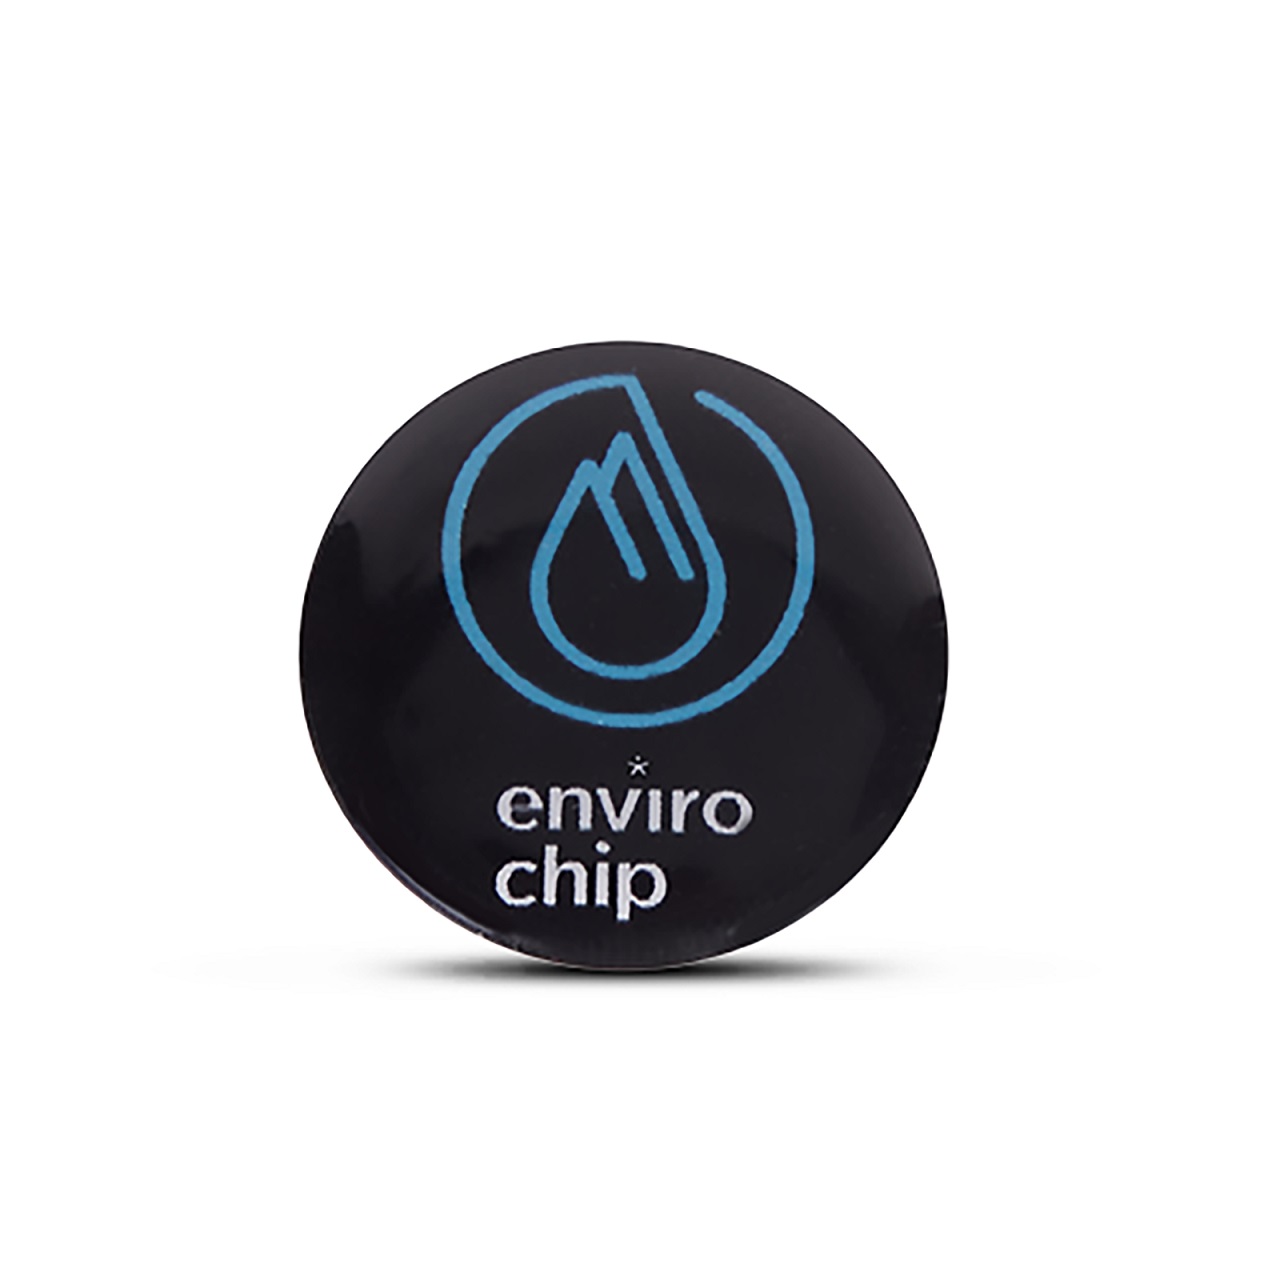 envirochip-clinically-tested-patented-anti-radiation-chip-for-mobile-phone-elements-design-water-black